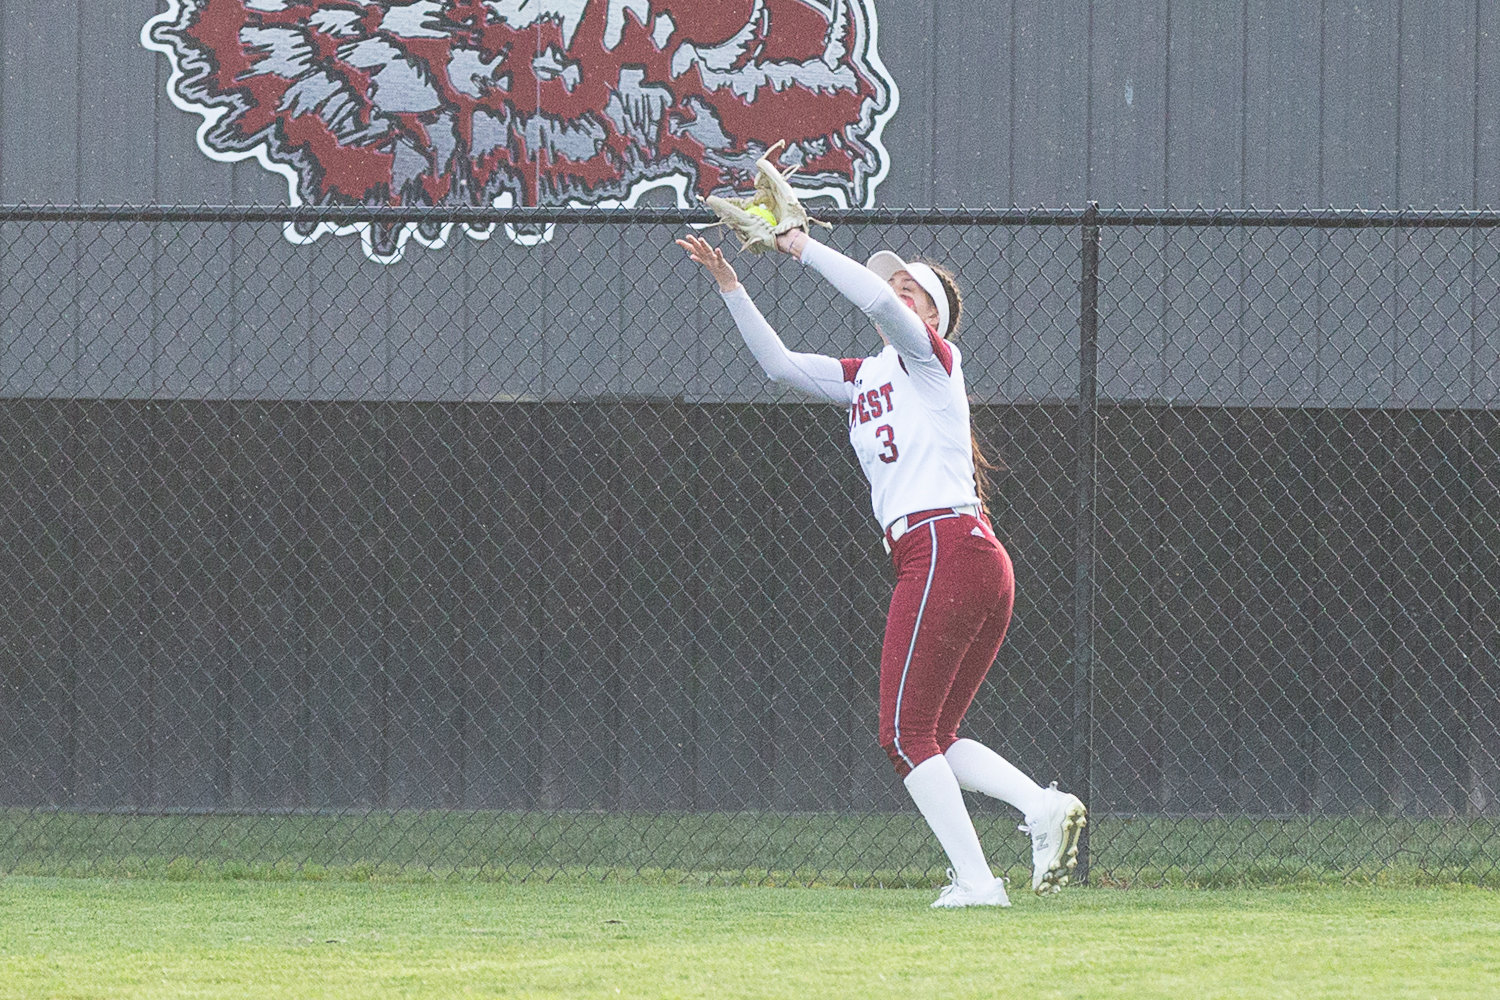 Chase White makes a catch in left field during the first inning of W.F. West's 3-2 win over Tumwater on March 22 at Rec Park.